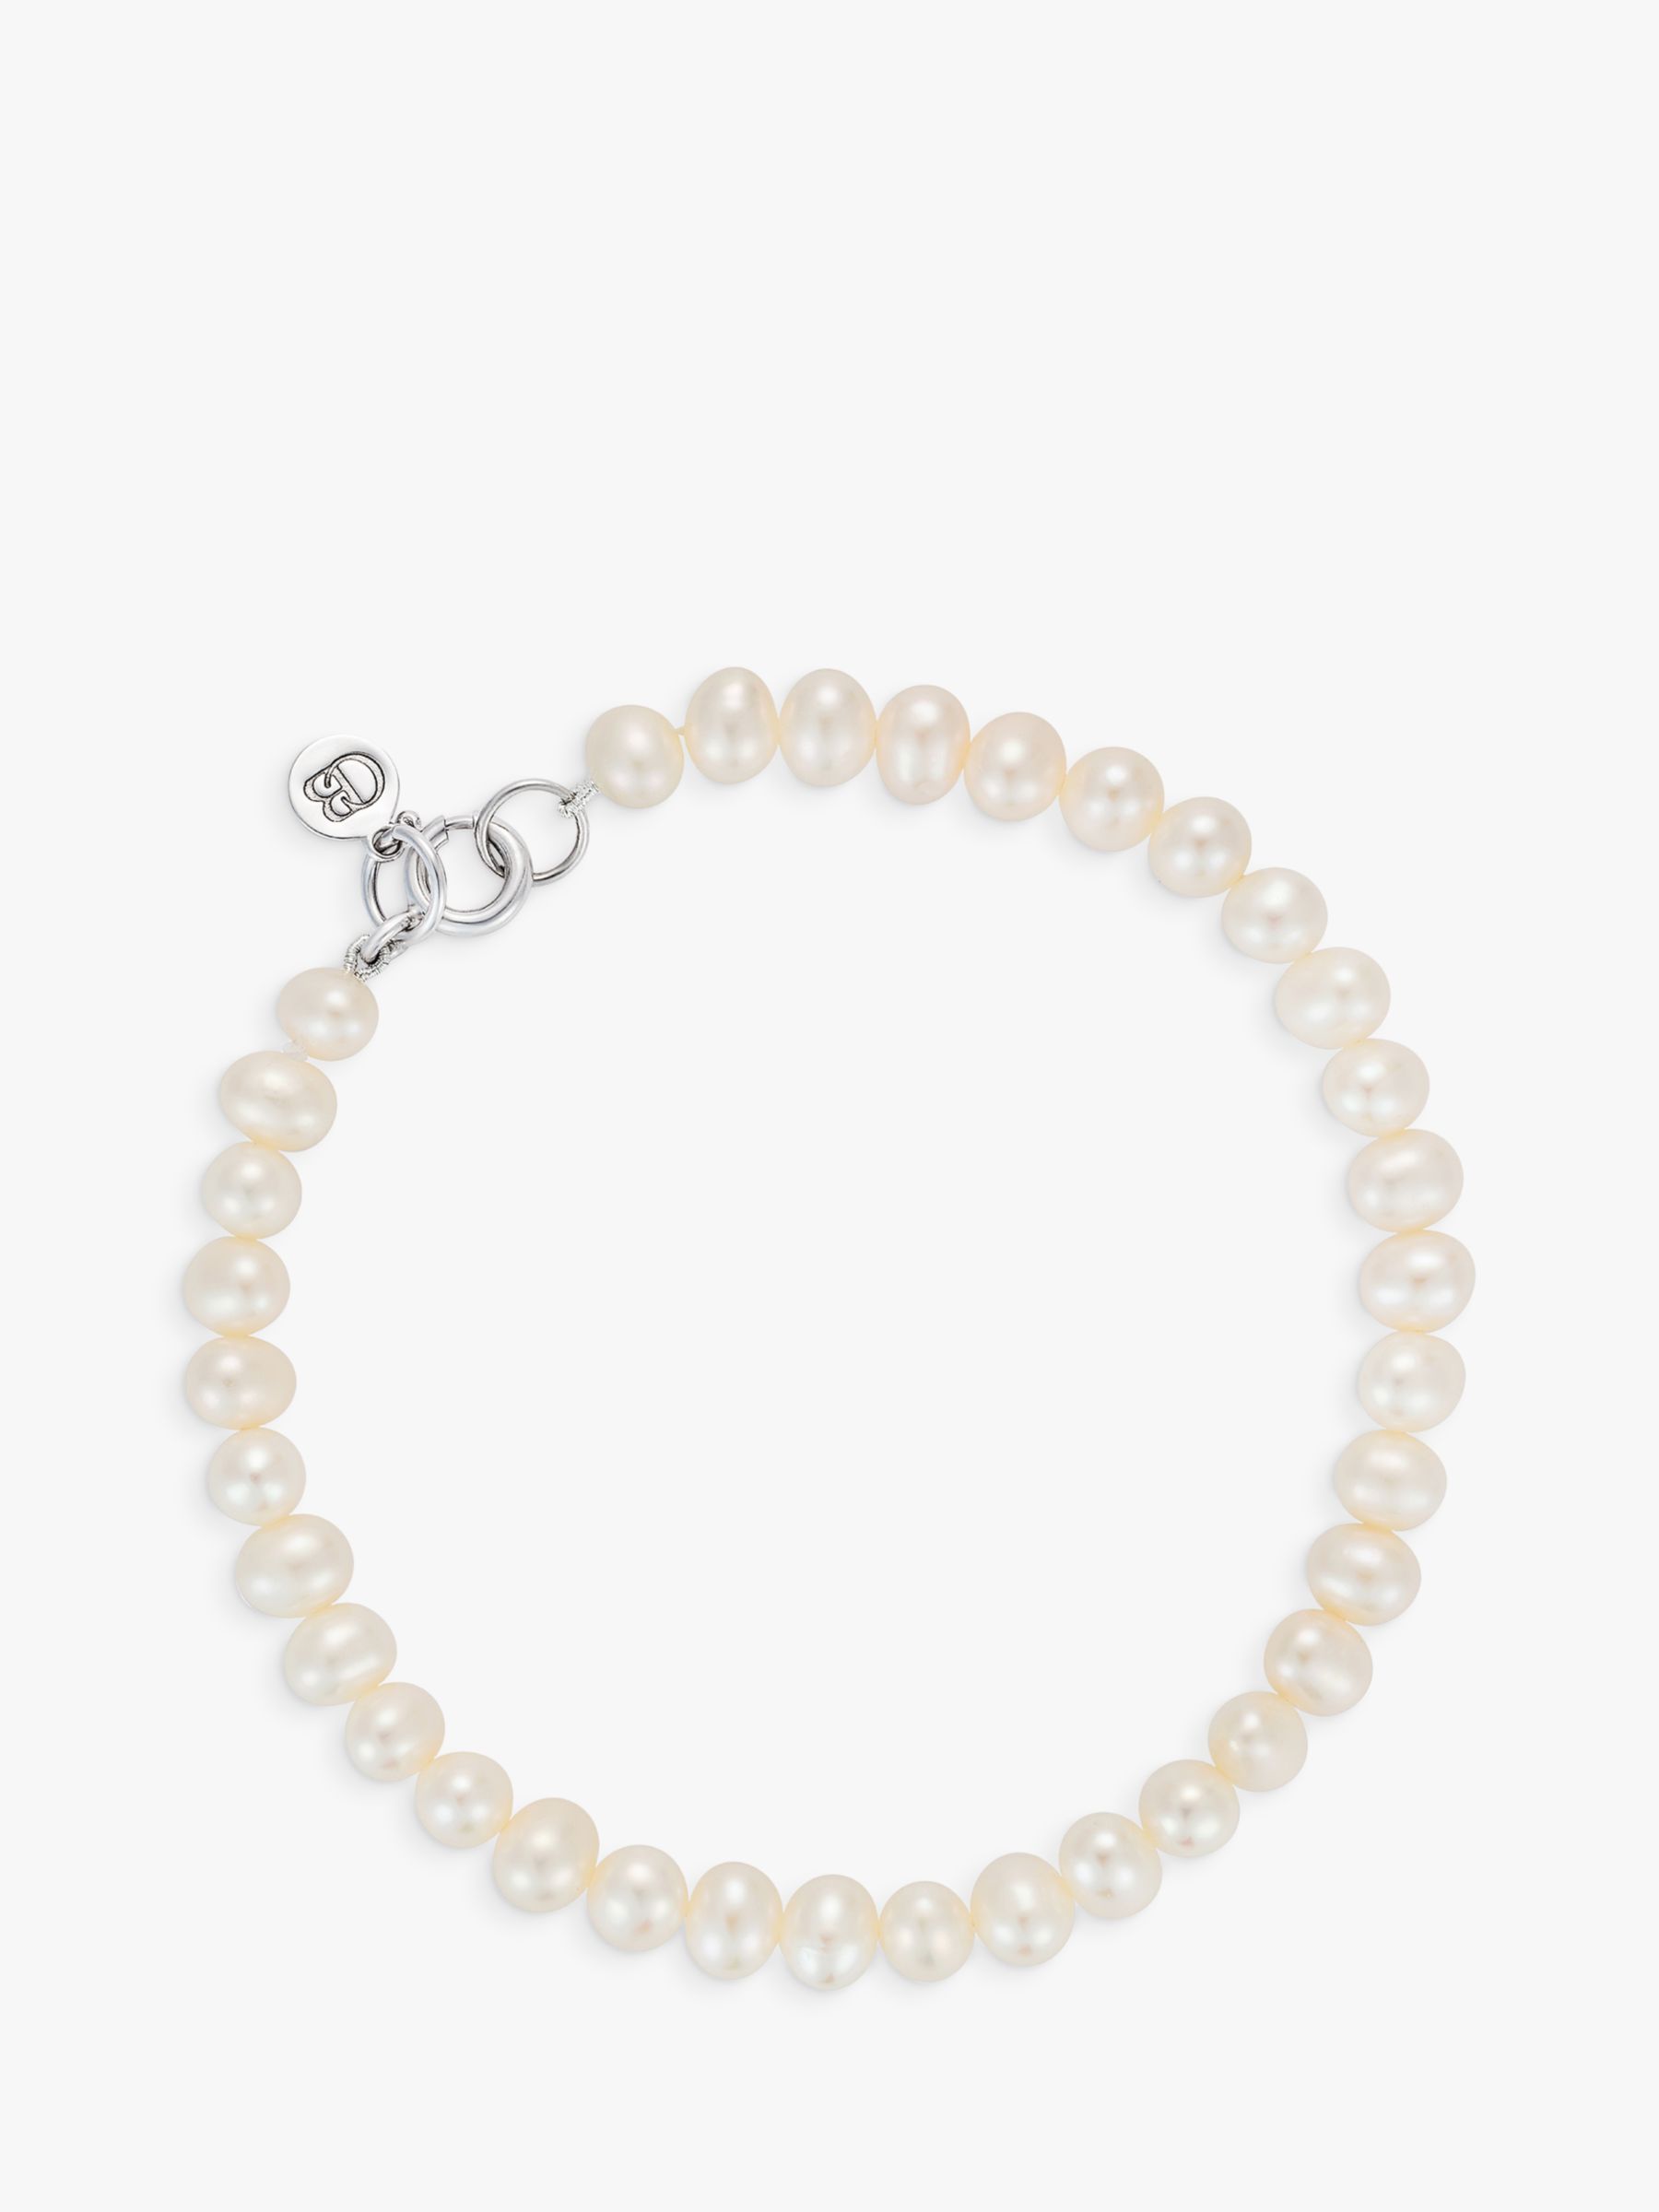 Pearl Necklaces for Men  A Trend Here to Stay – claudiabradby